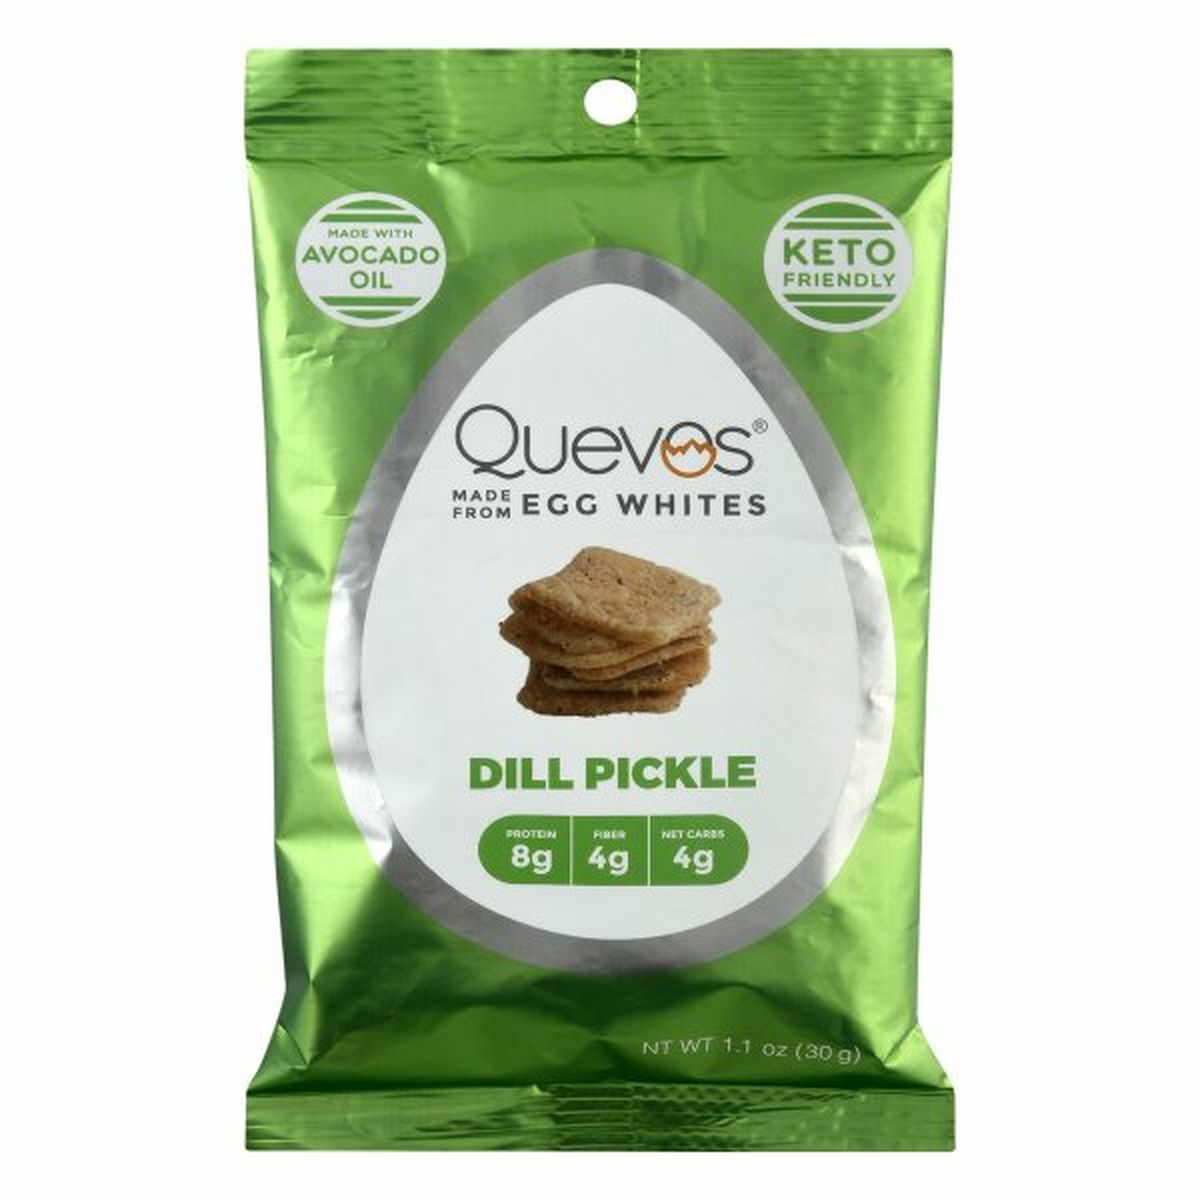 Calories in Quevos Egg White Chips, Dill Pickle